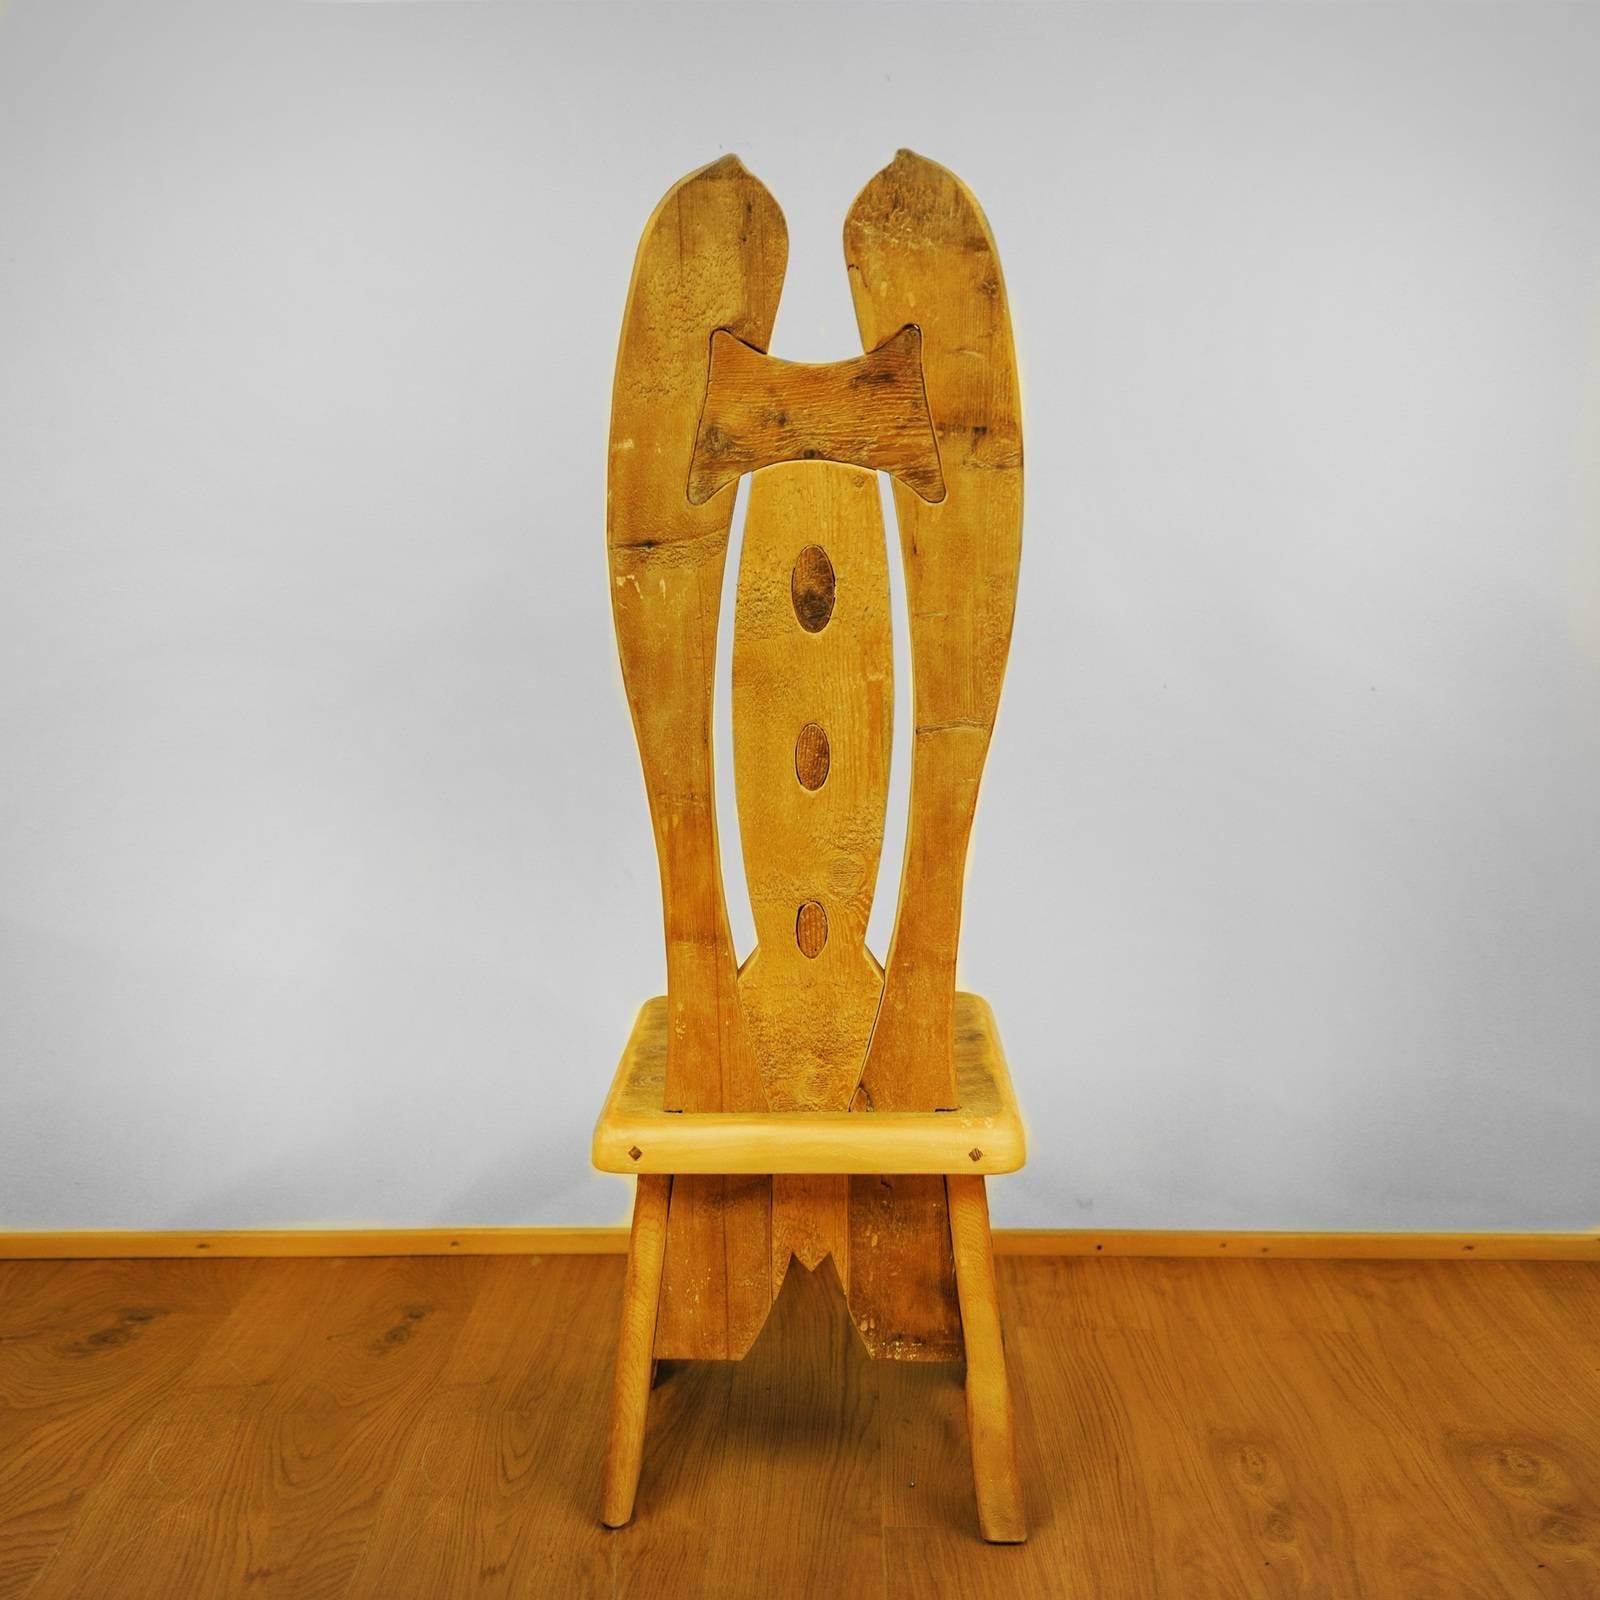 Playfully reminiscent of a bowtie topping a button-down shirt, the decoration gracing the backrest of this chair was crafted using Swiss pine, pine, larch, and fir coming from 16th century old floors. The on-of-a-kind effect is striking and creates